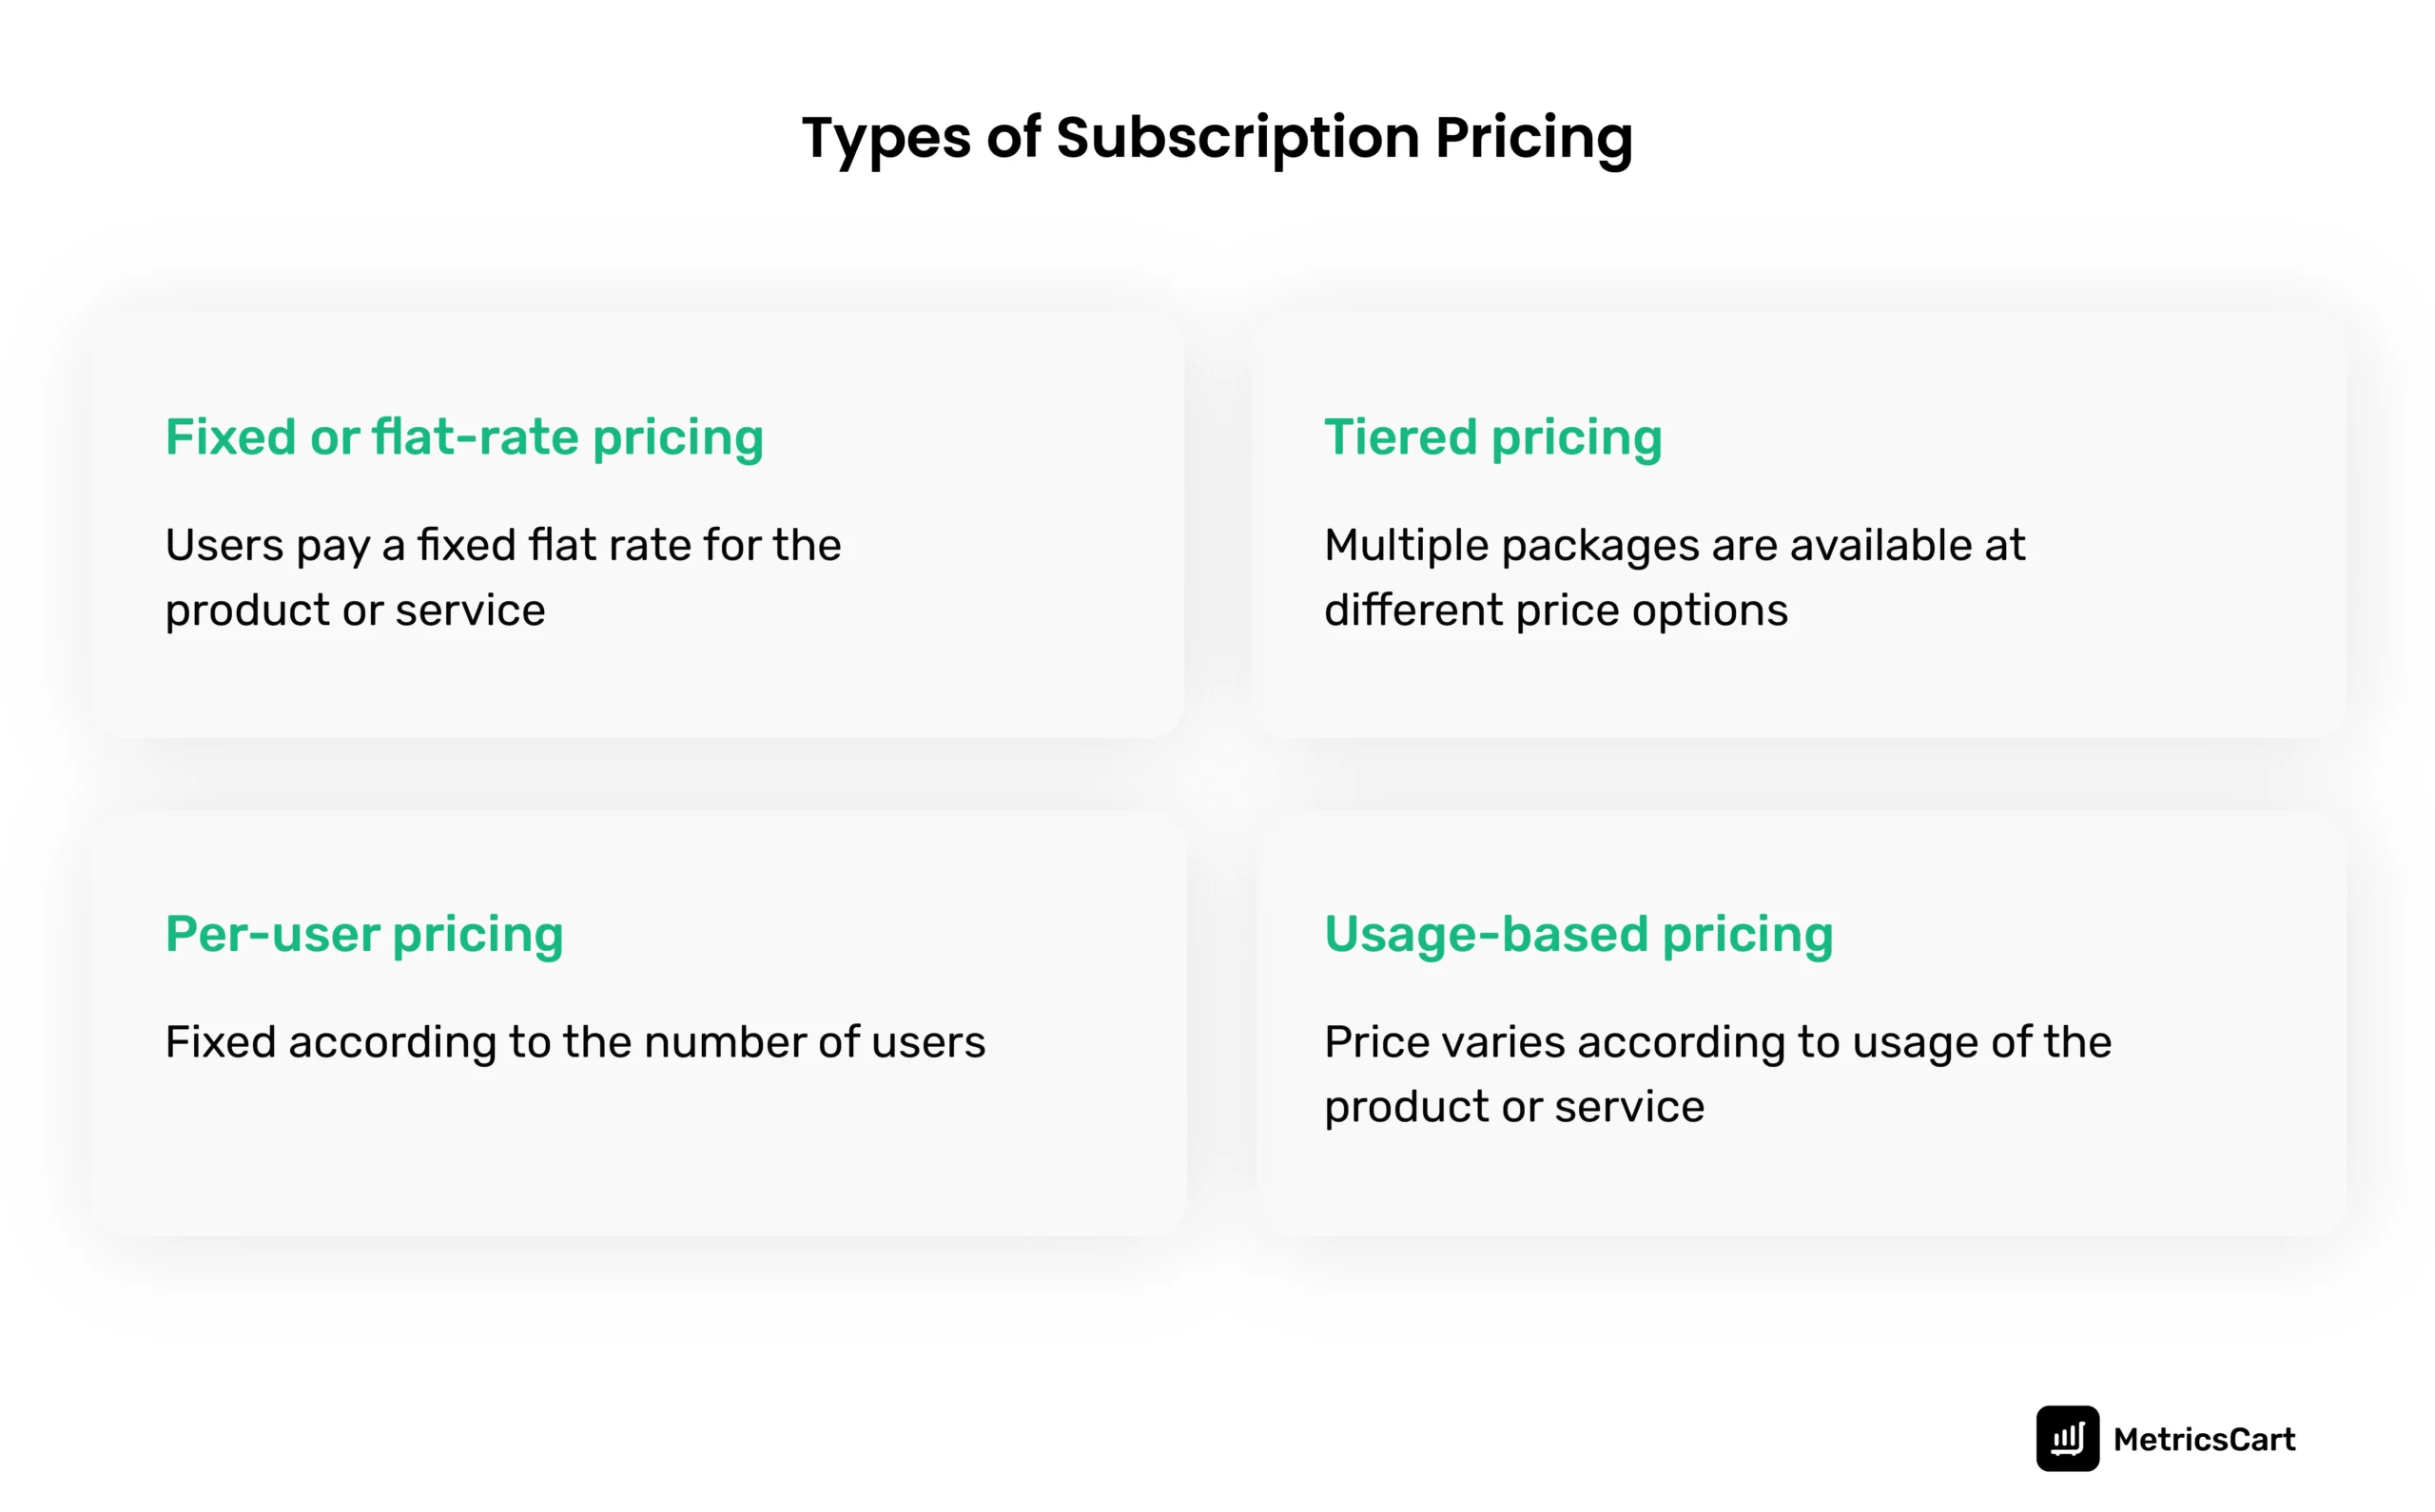 A description of the four different subscription models: flat-rate pricing, per-user pricing, tiered pricing, and usage-based pricing.